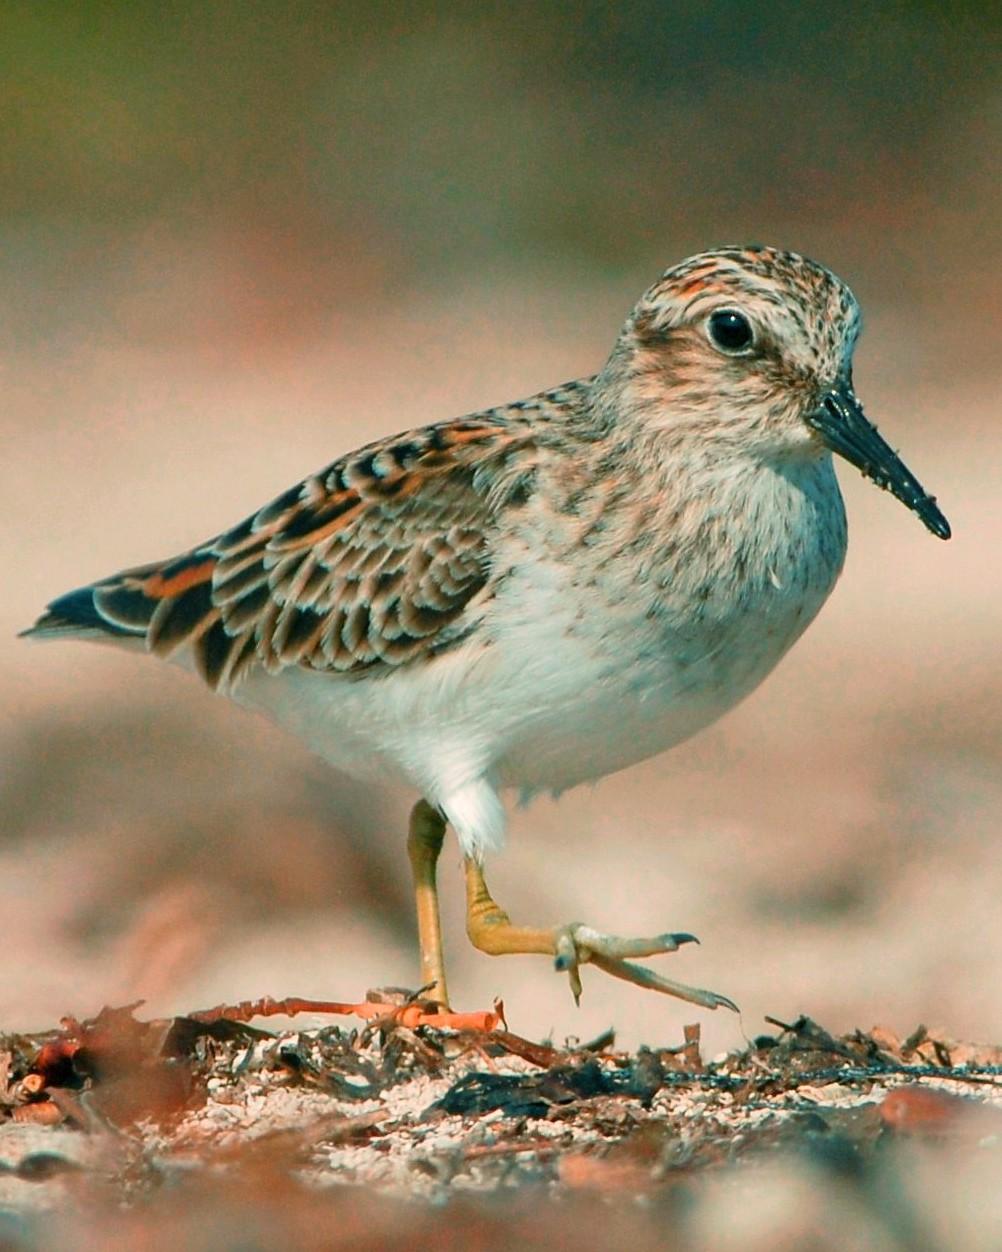 Least Sandpiper Photo by David Hollie